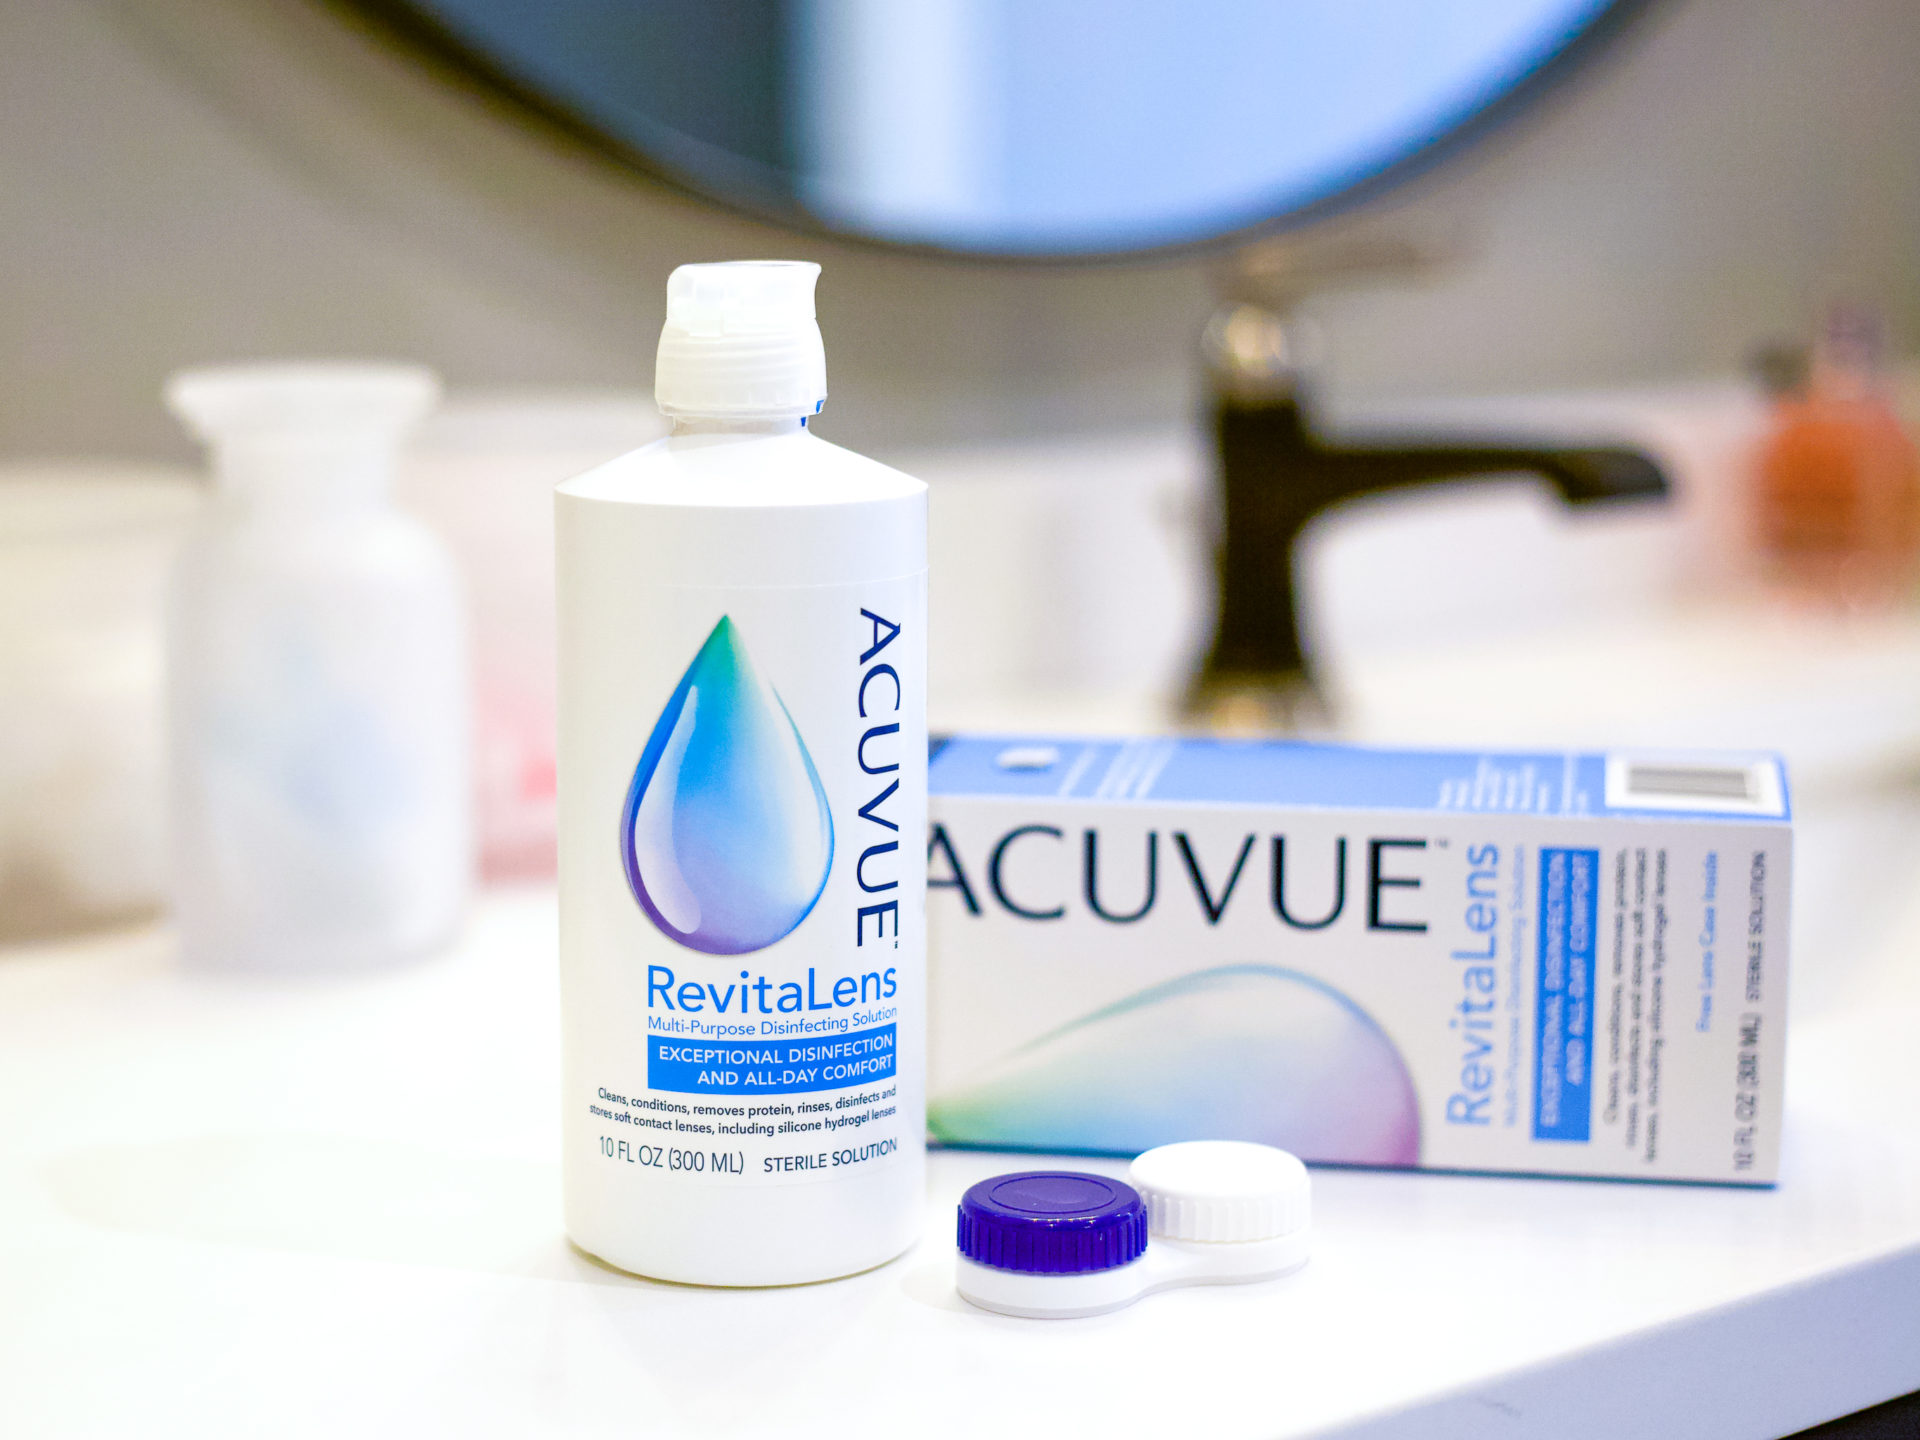 Acuvue Contact Lens Solution Just $3.49 At Kroger (Regular Price $9.99)